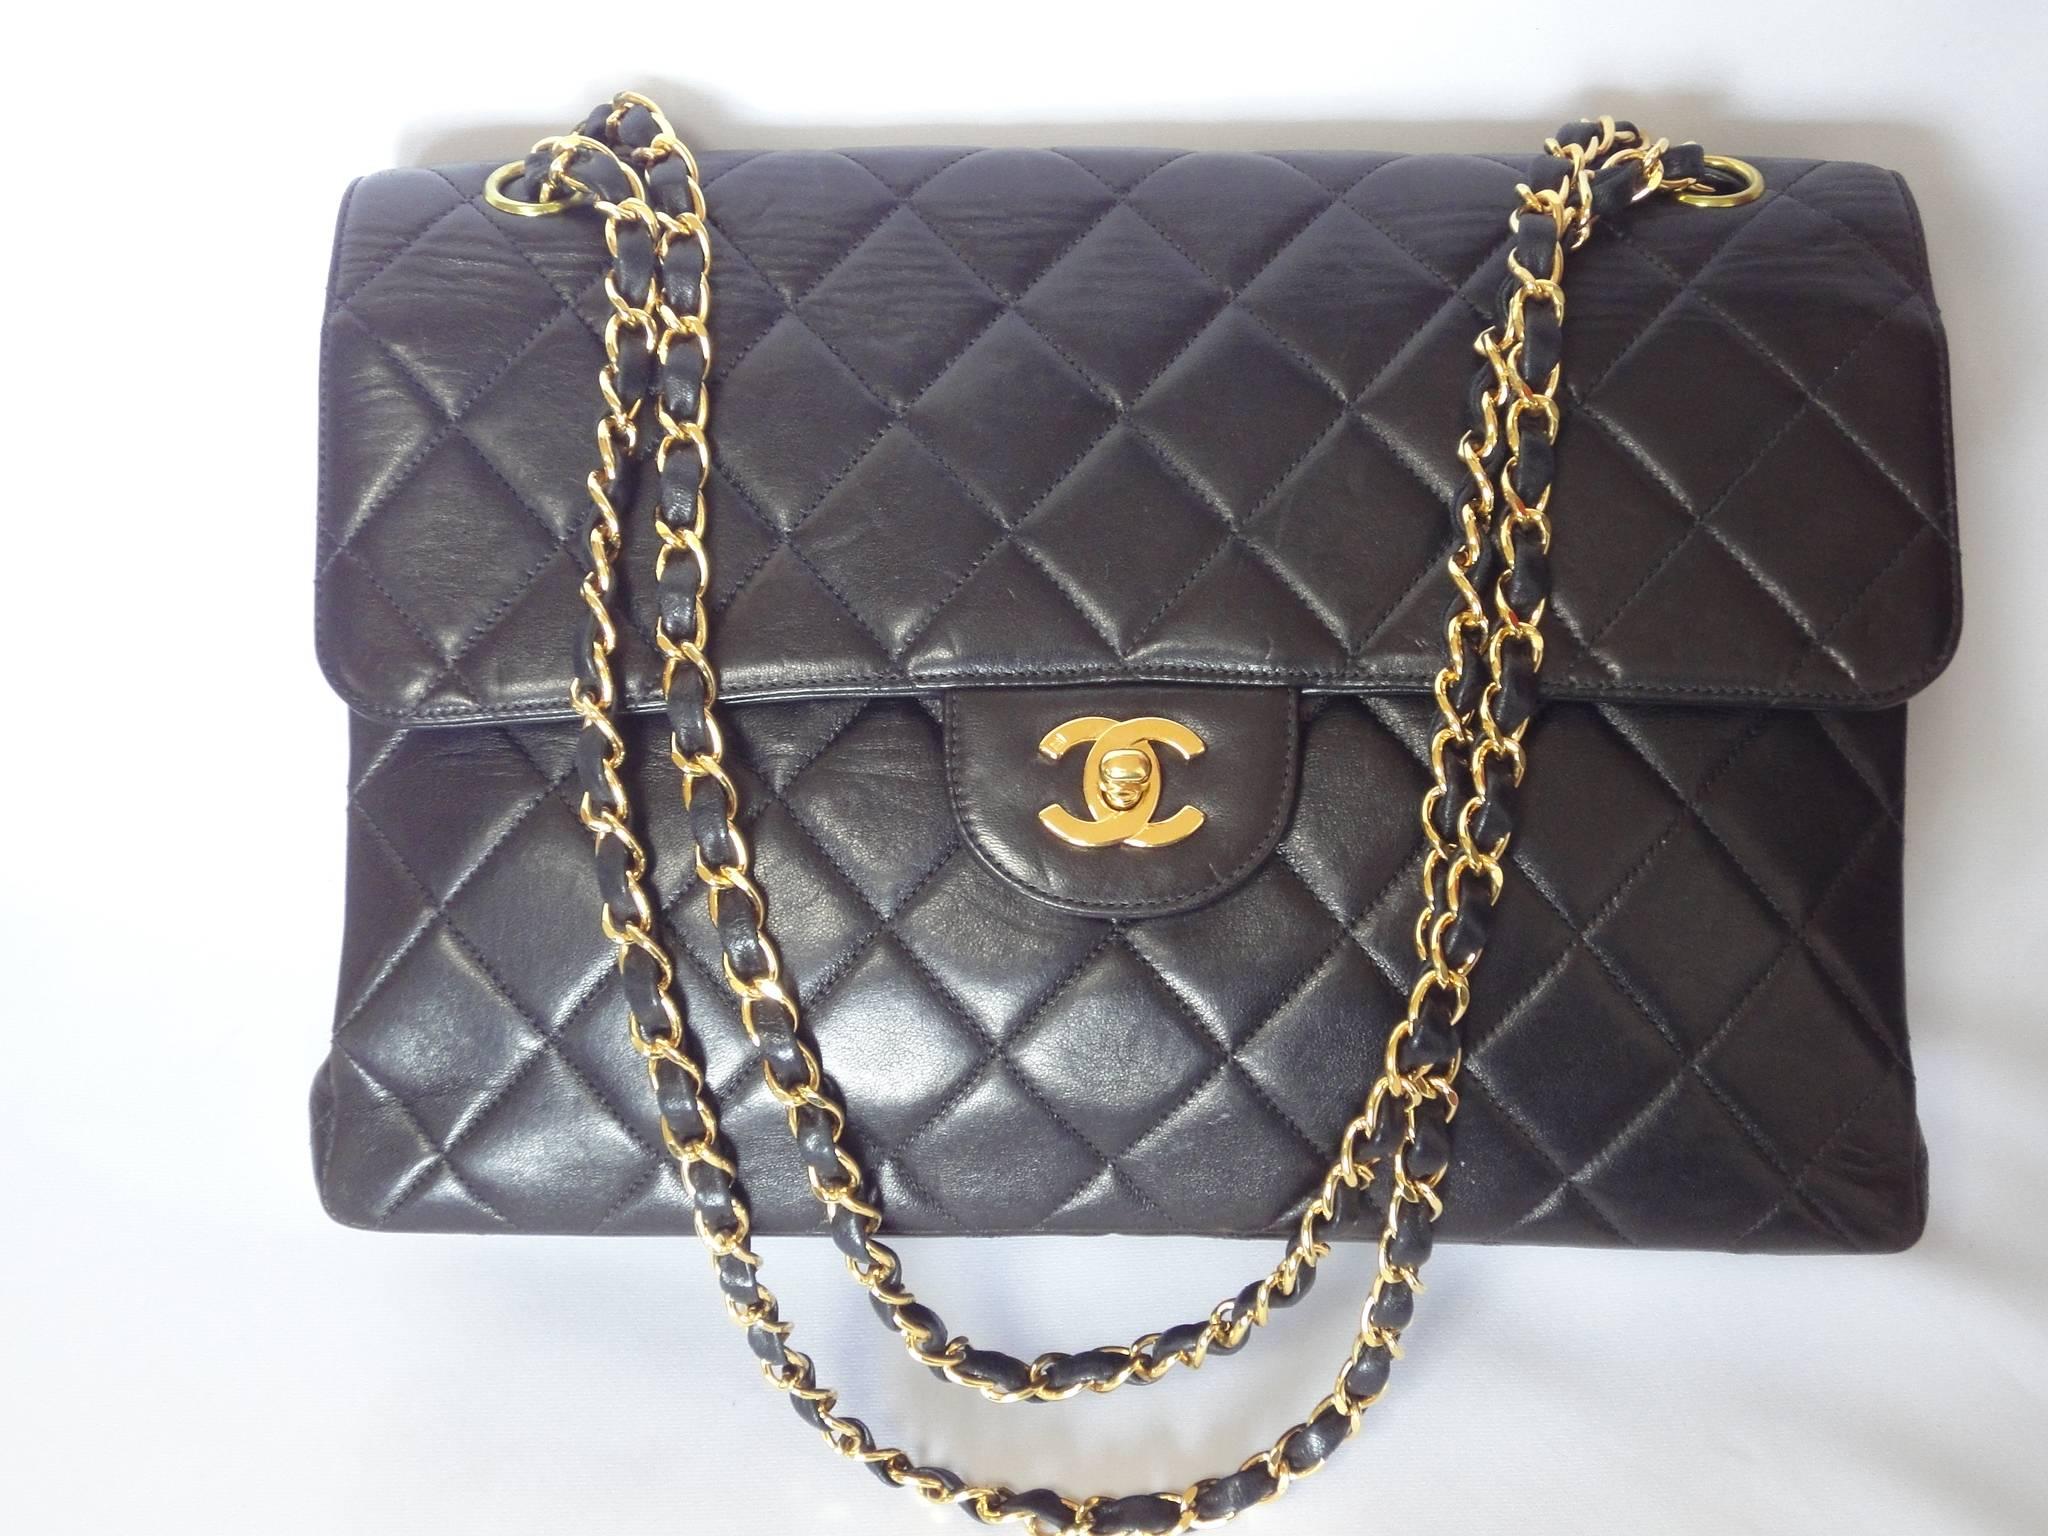 Vintage CHANEL black lambskin 2.55 jumbo, large shoulder bag, double side flap/double side closure flap bag.

Introducing one of the most popular and classic bags from CHANEL back in the 90's. 
Black jumbo/large size double chain 2.55 style